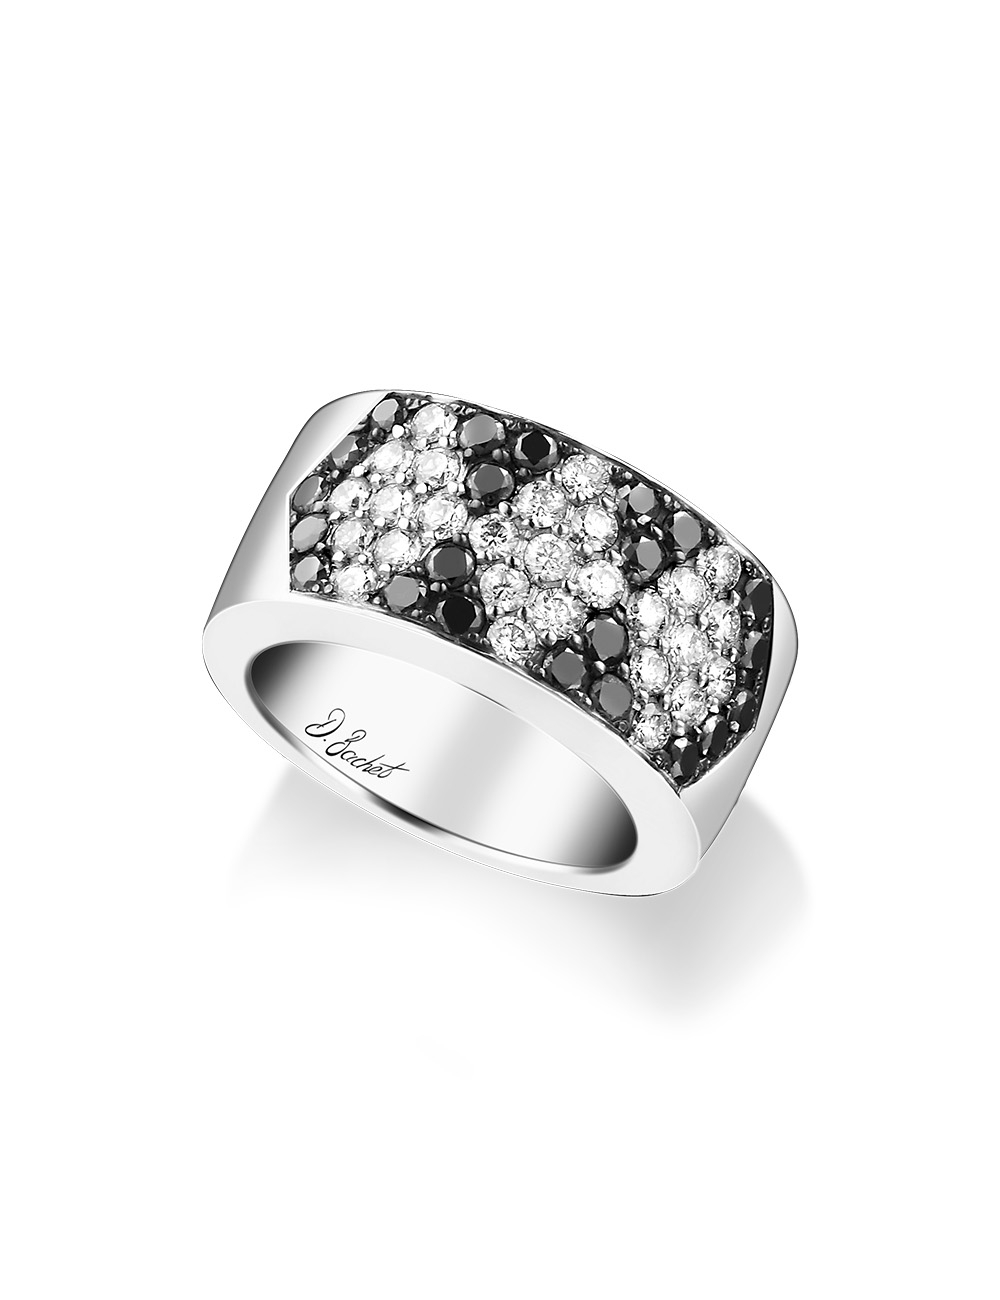 Luxury diamonds ring for women in platinum, the perfect gift for you or a loved one